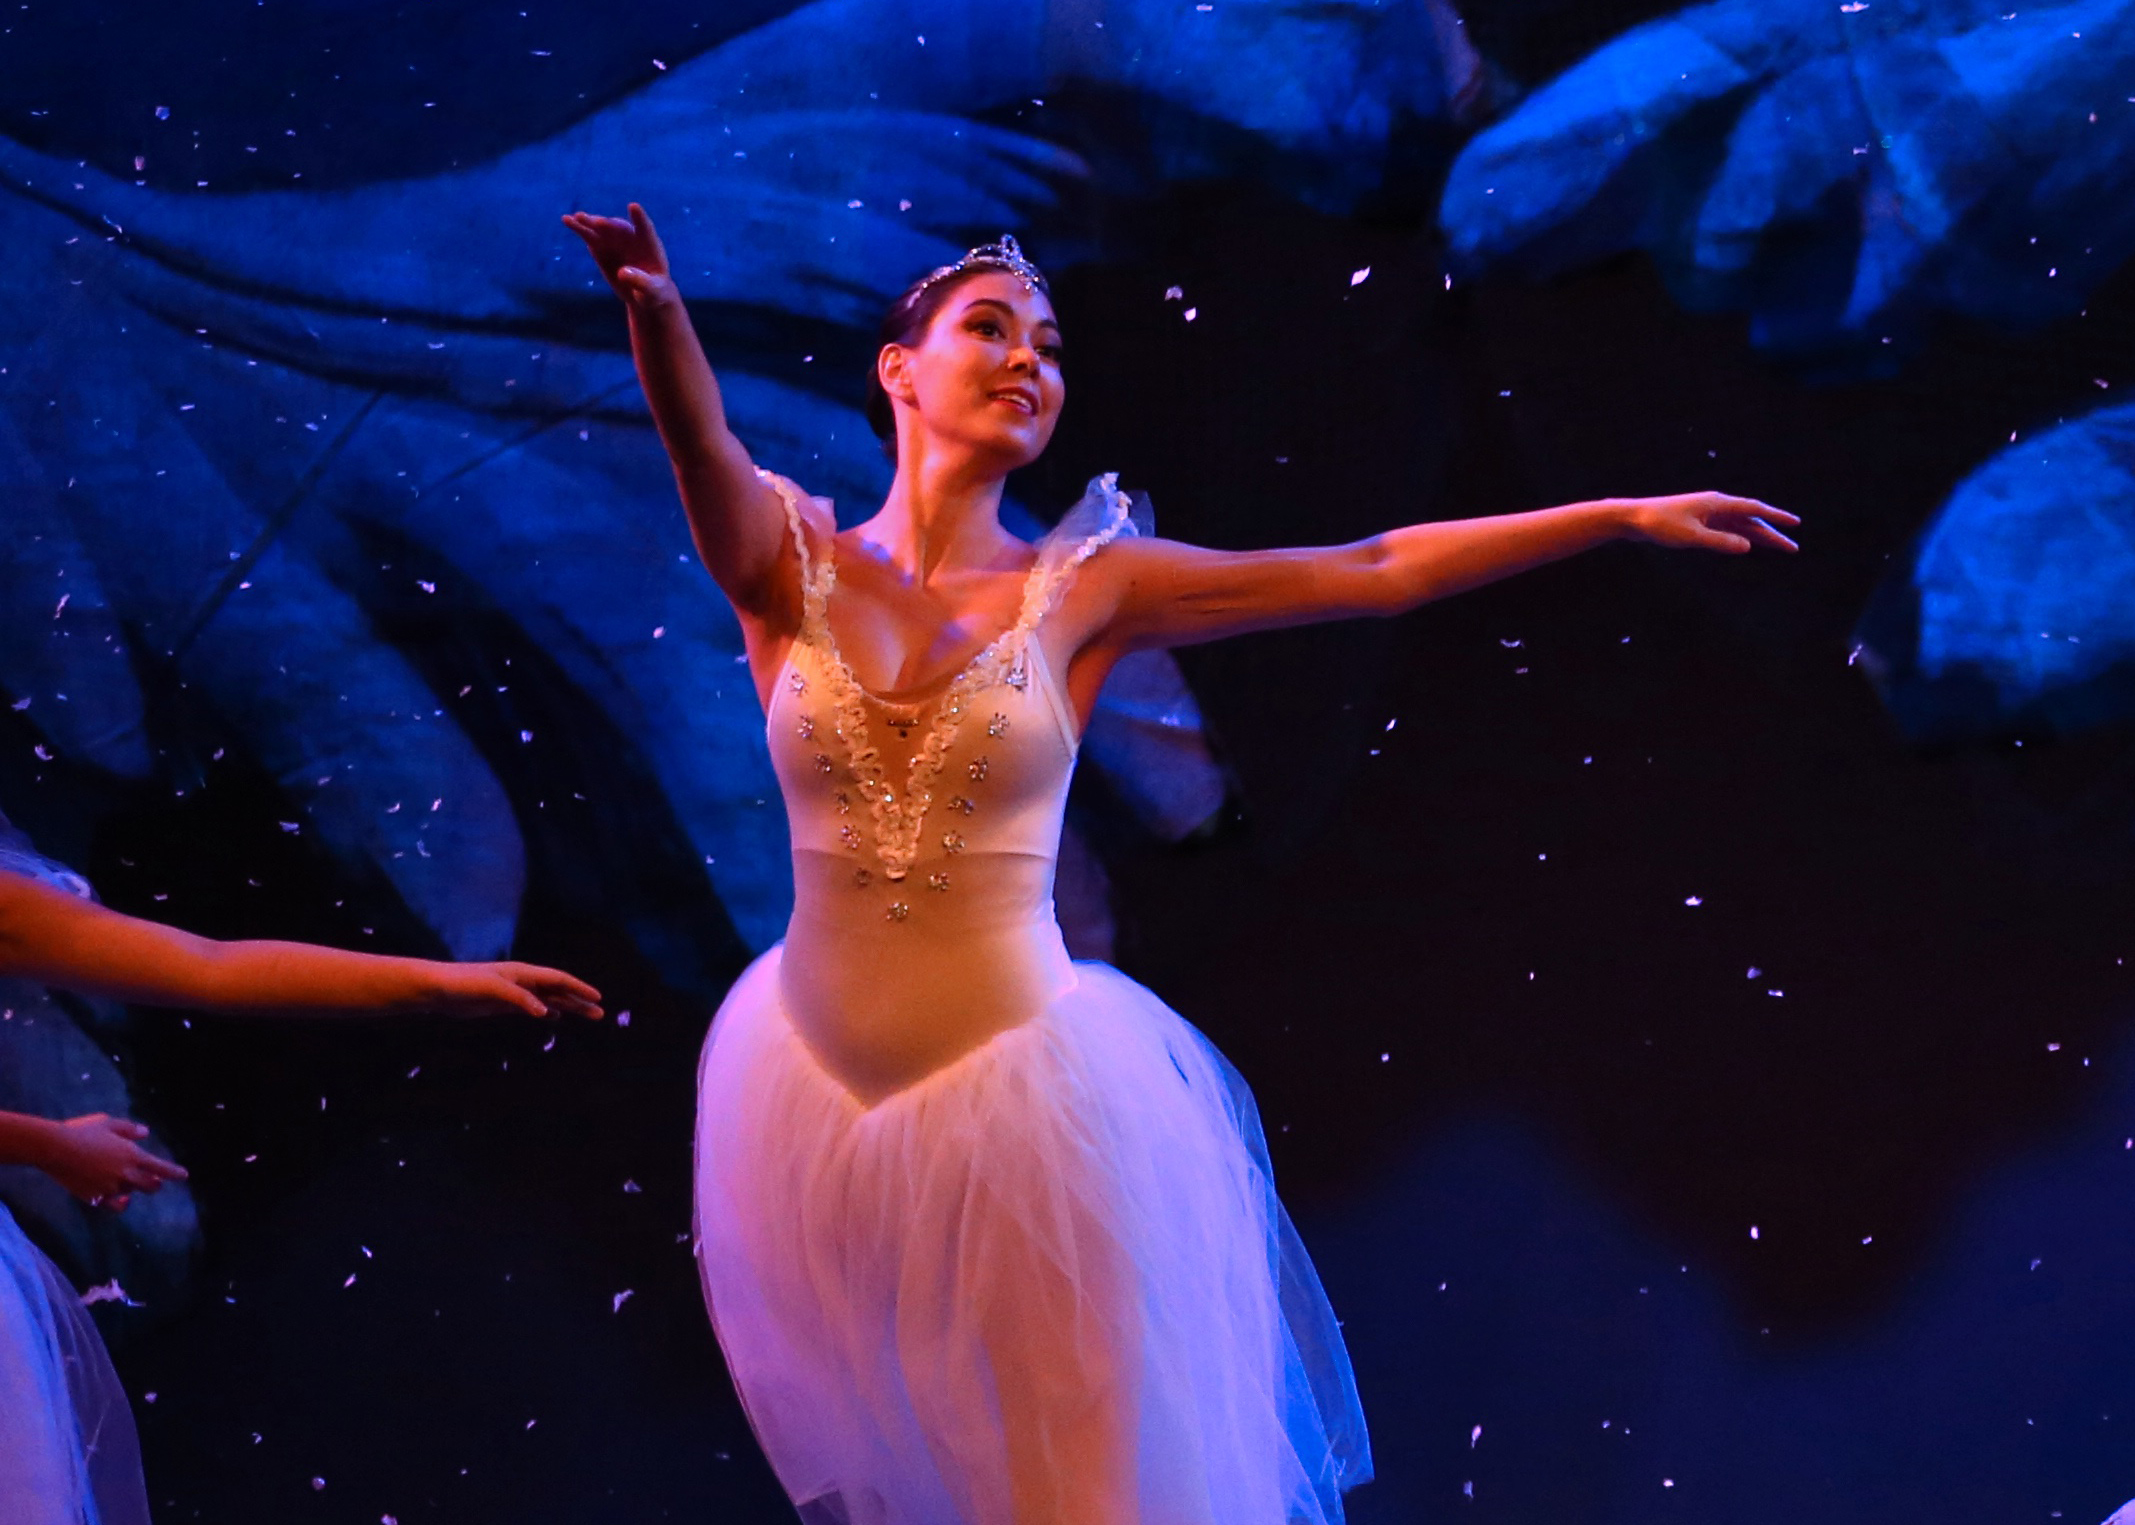 Alexandra Langley an adult ballet student, performs the Snow scene from The Nutcracker, wearing a white knee-length tutu and a small tiara. She is shown from the waist up, dancing in front of a backdrop with large, snowy evergreen trees. Her arms are in fourth position while smiling out to the audience.